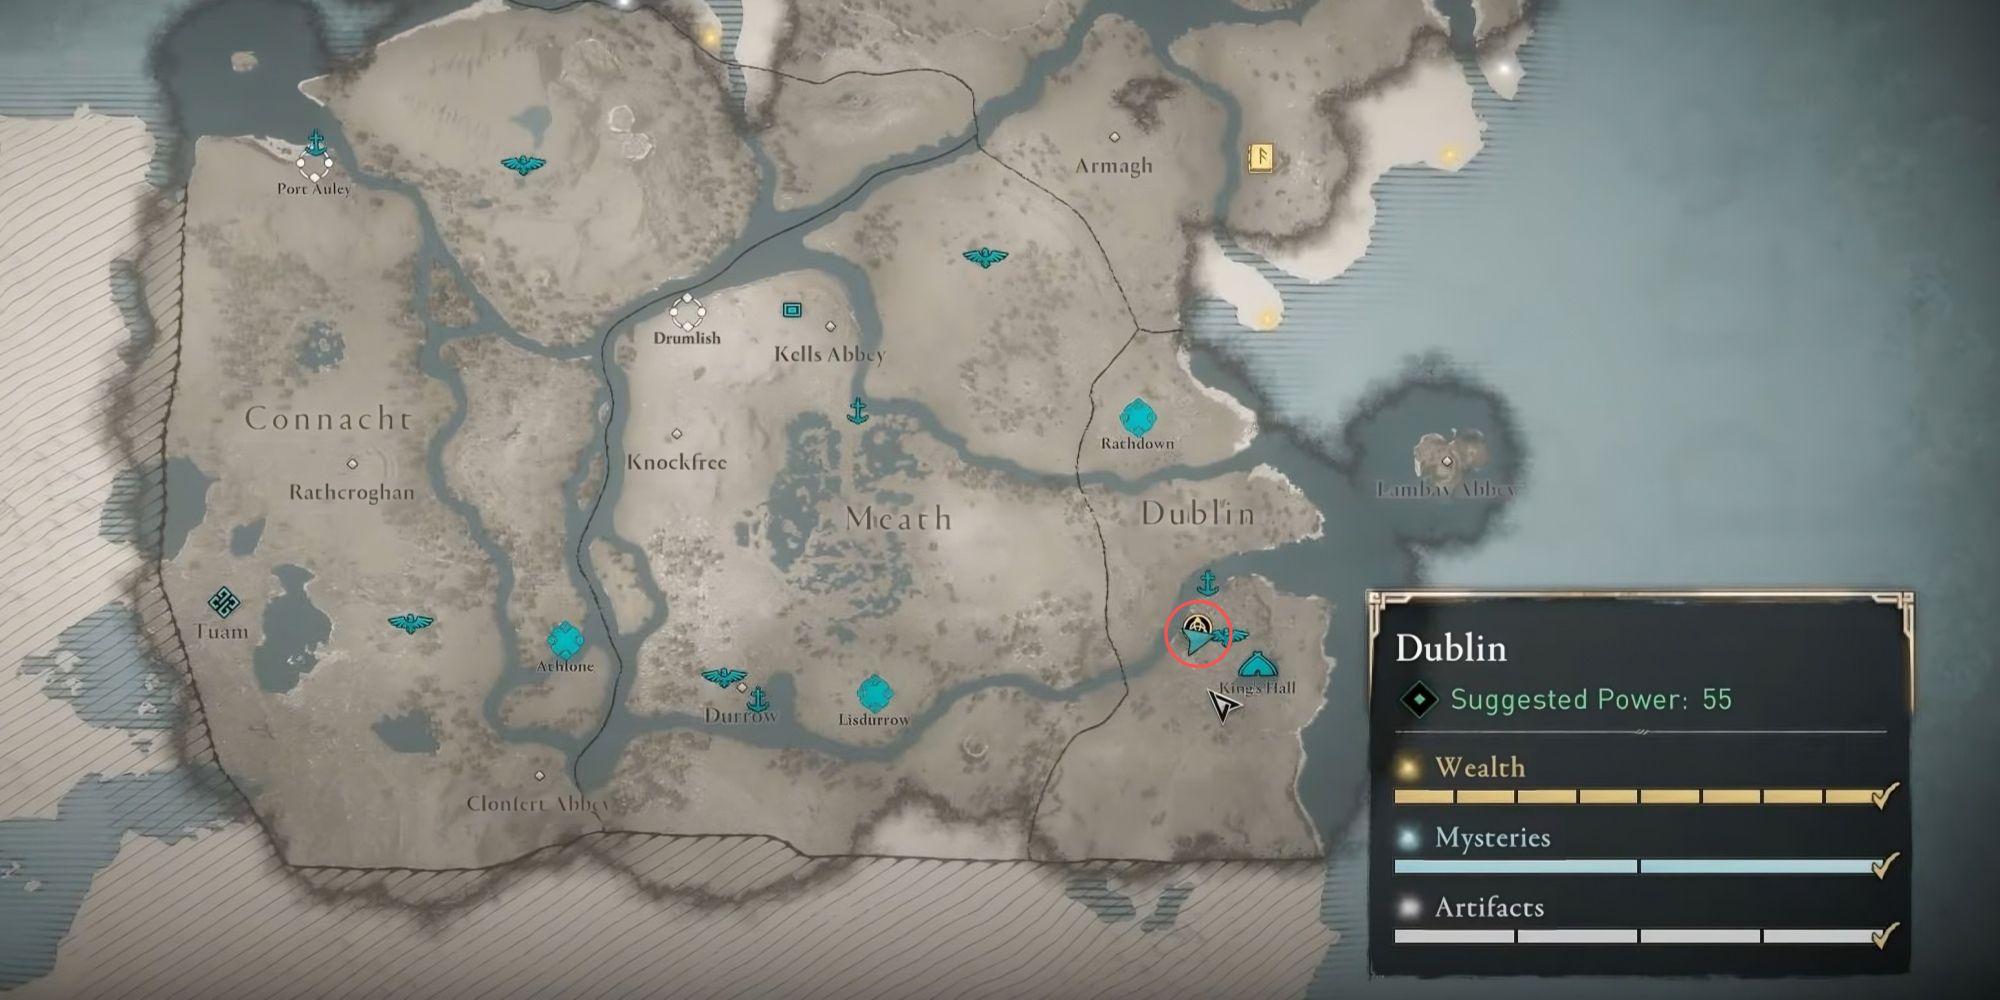 Assassin's Creed Valhalla: Wrath of the Druids - Children of Danu Locations